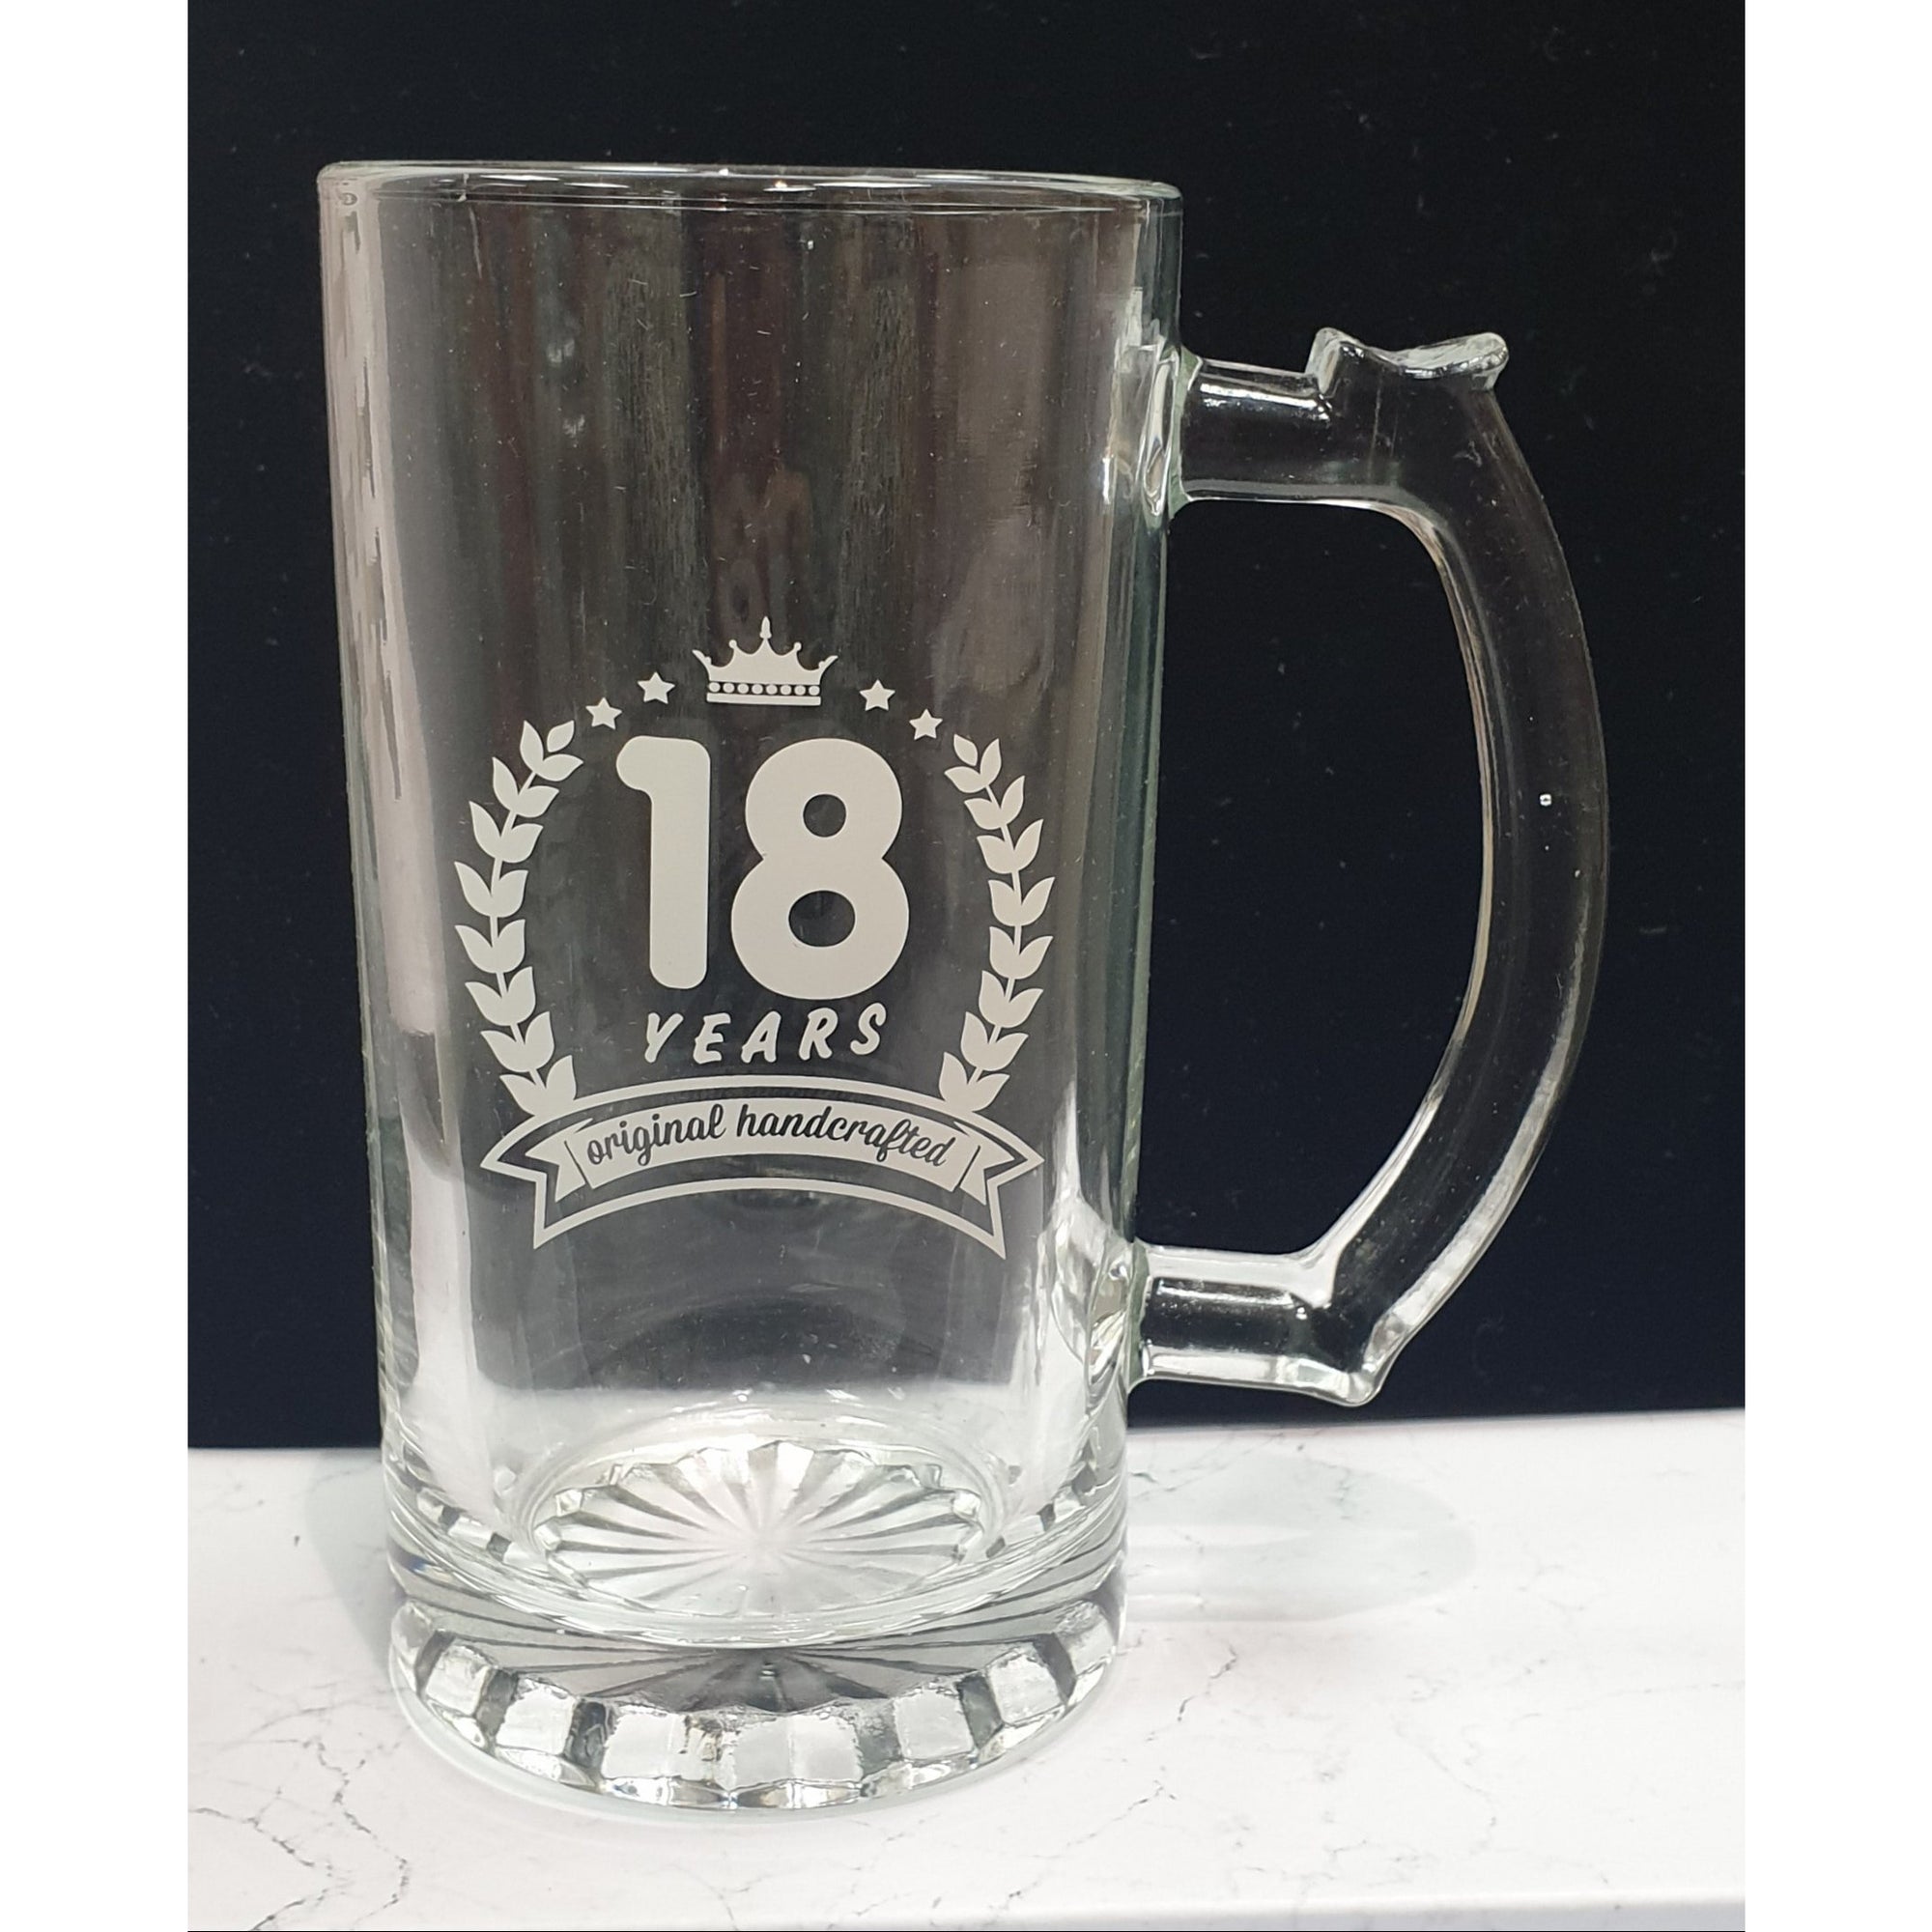 Beer Stein Glass - 18 Not specified